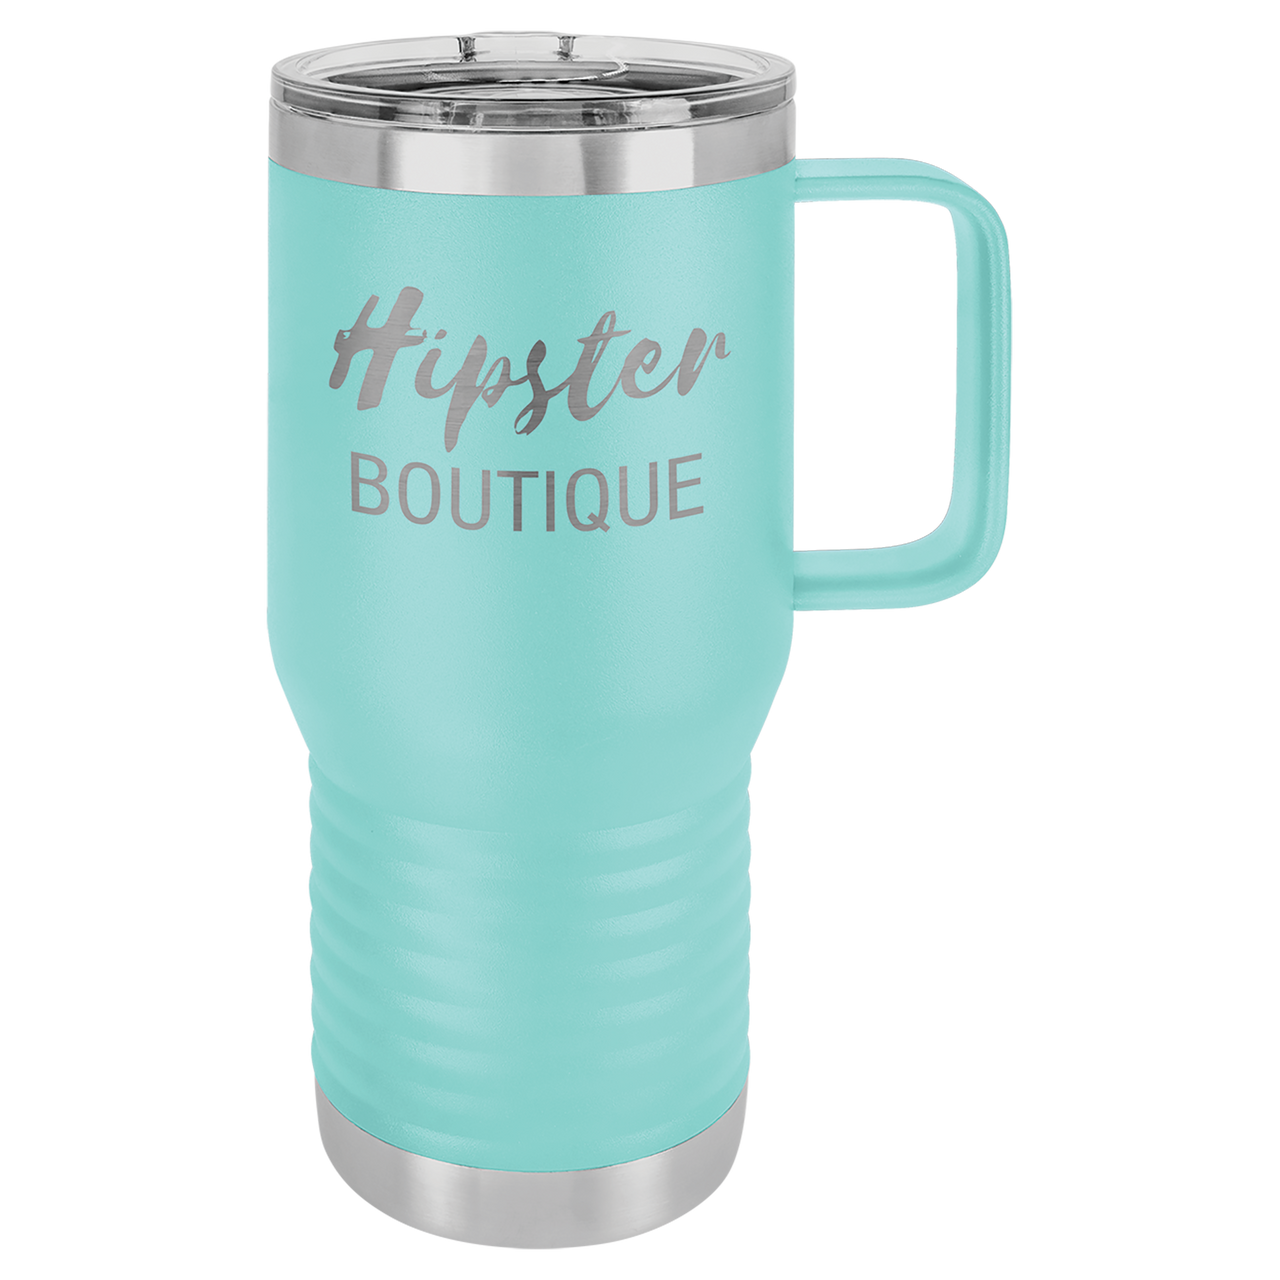 10 oz Vacuum Insulated Travel Mug with Slider Lid - Personalized